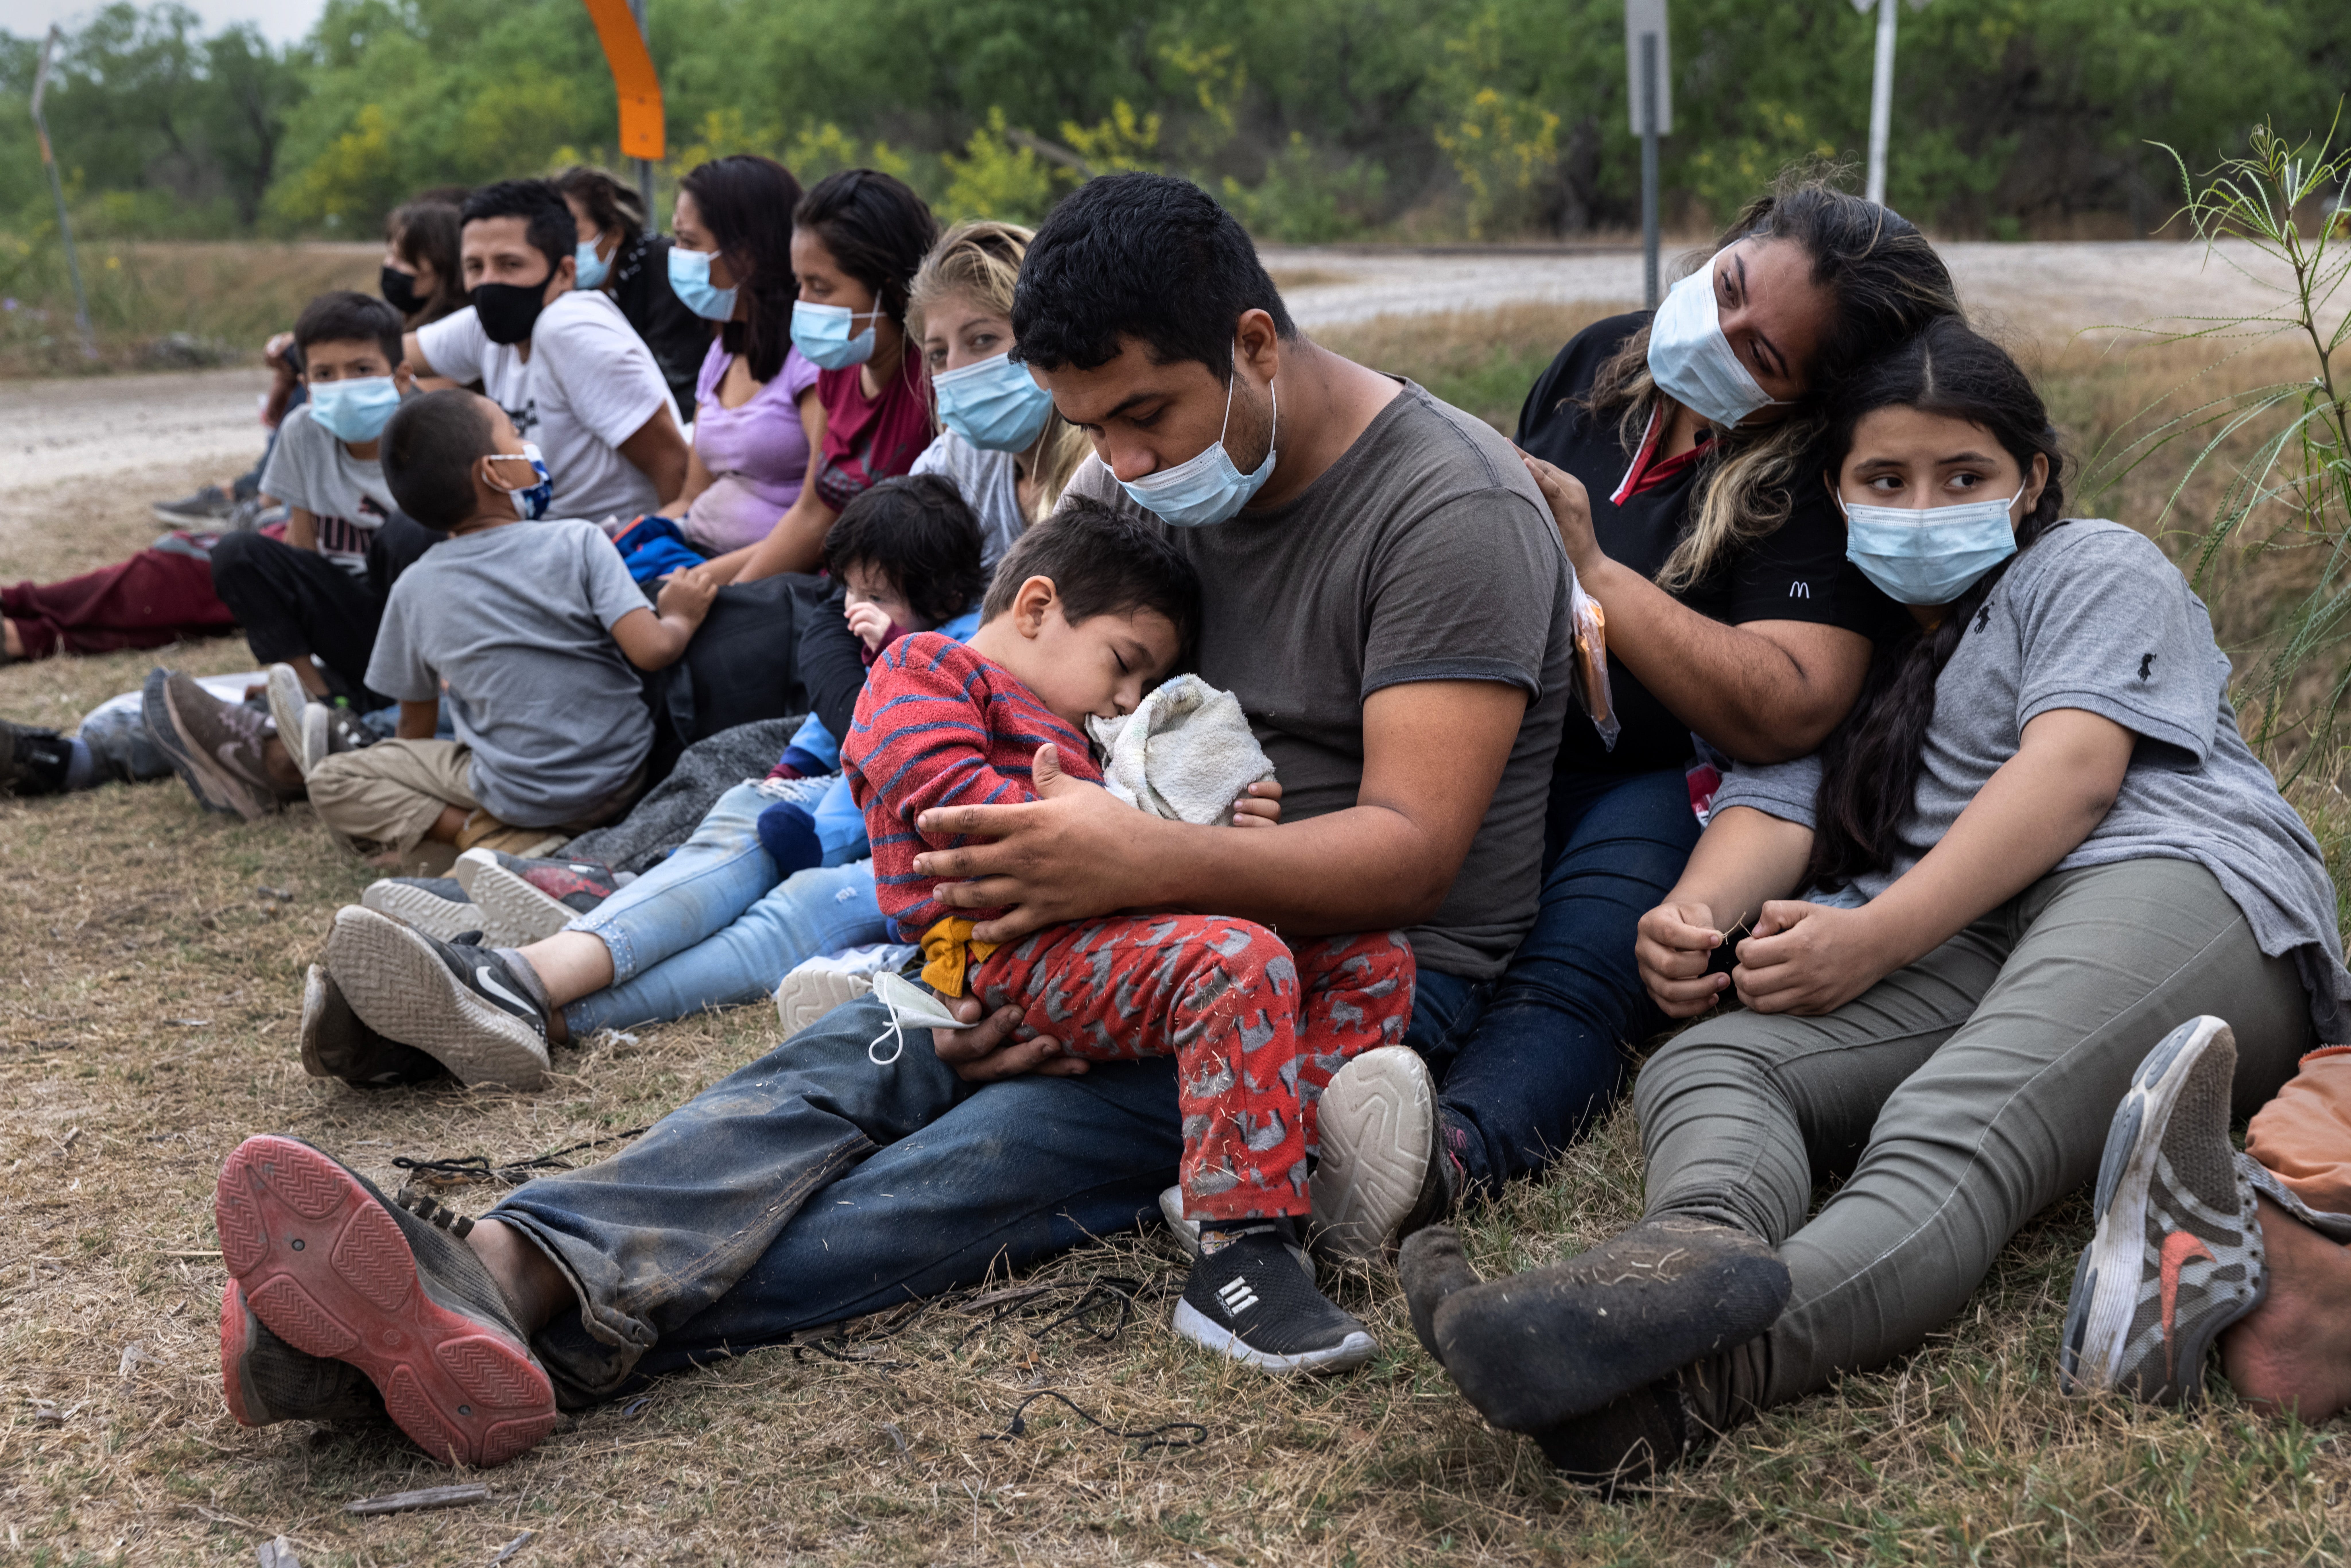 A Guatemalan family waits with fellow immigrants to board a U.S. Customs and Border Protection bus to a processing center after crossing the border from Mexico April 13 in La Joya, Texas.